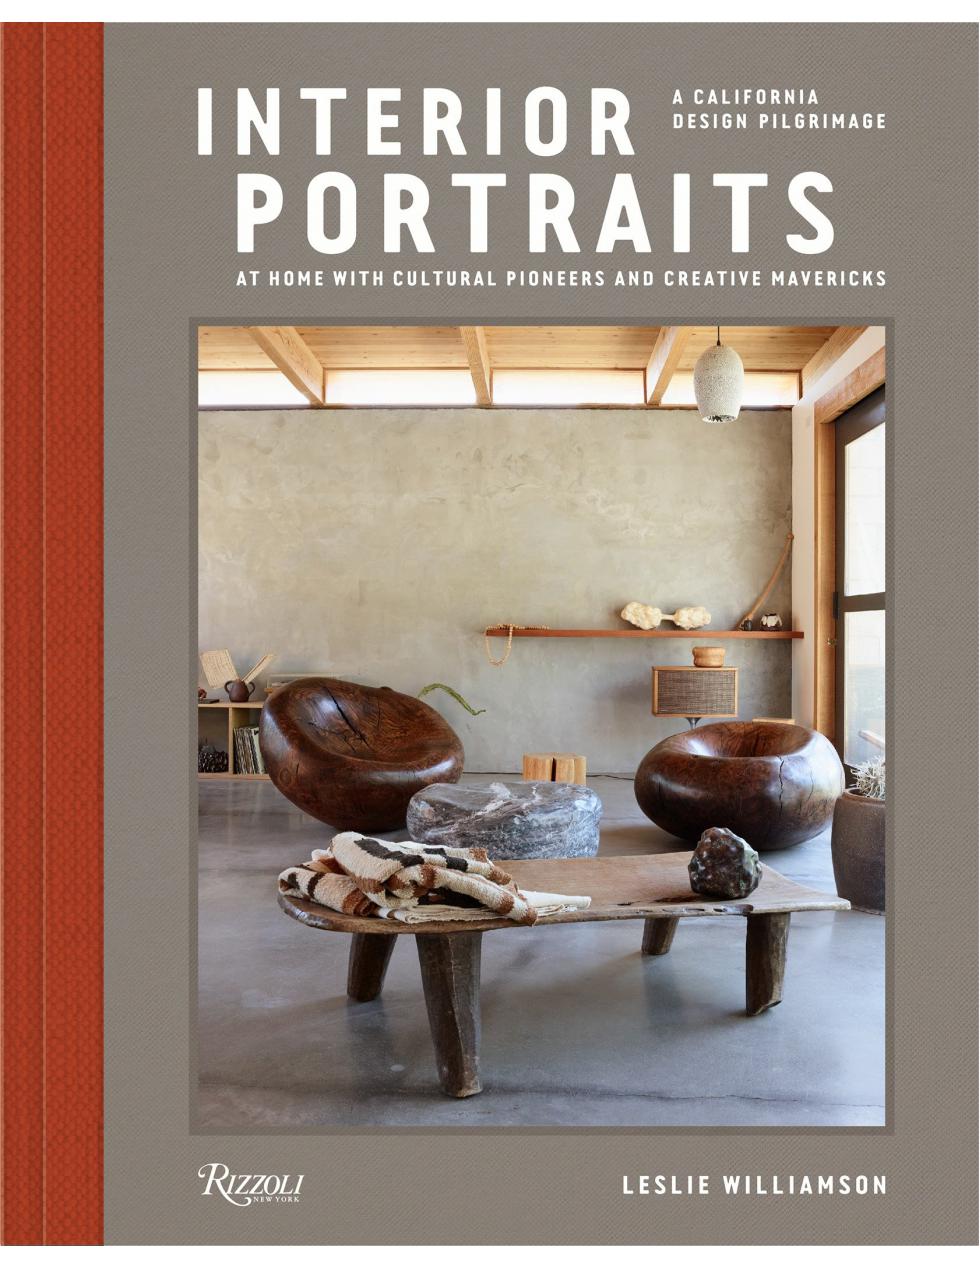 Book : Interior Portraits - At Home With Cultural Pioneers and Creative Mavericks